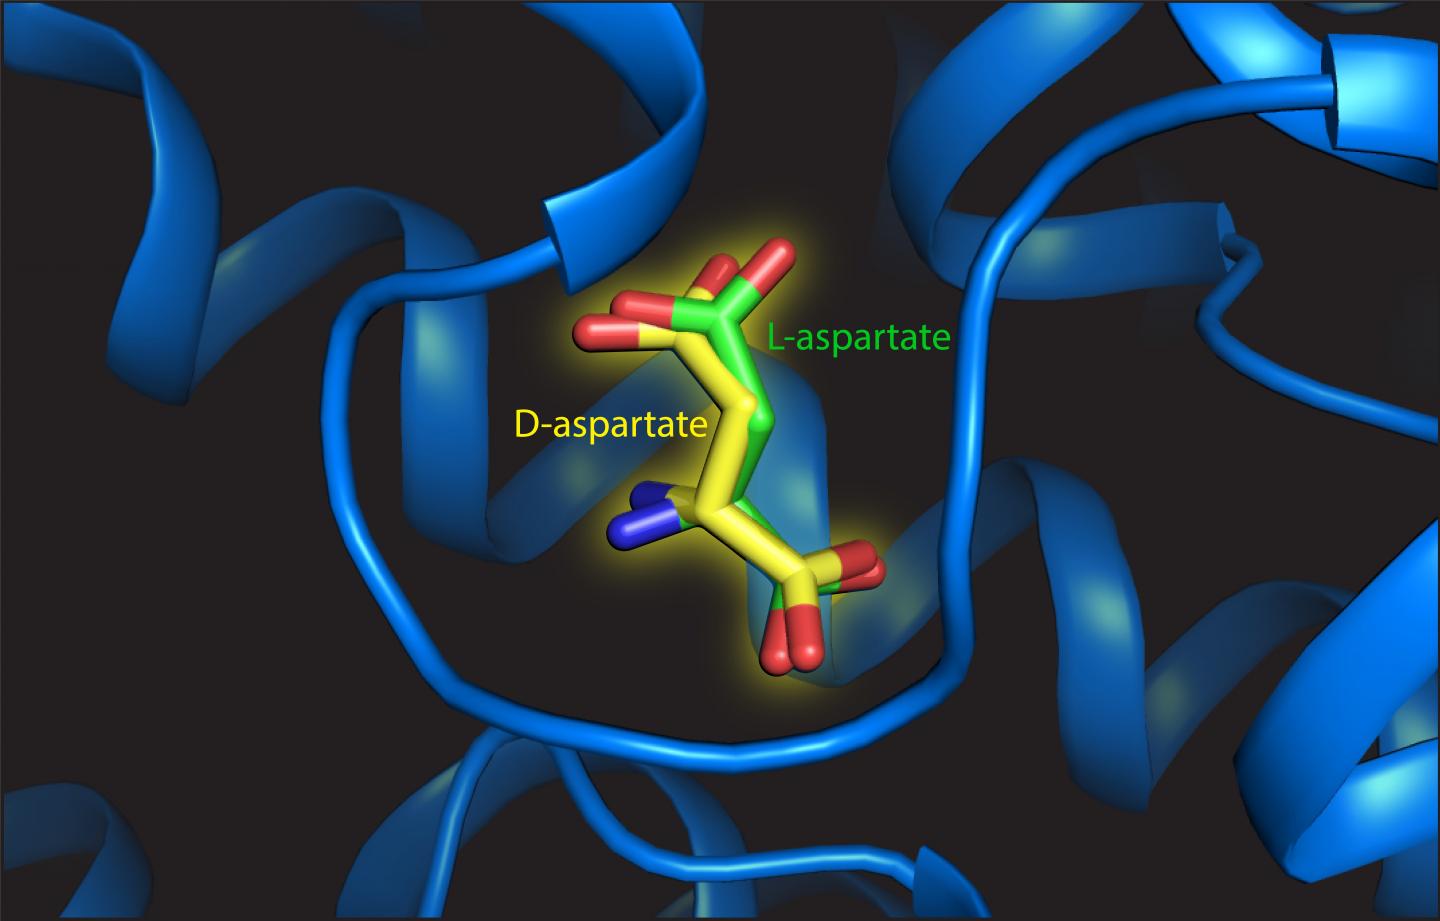 L- and D-Aspartate at the Binding Site